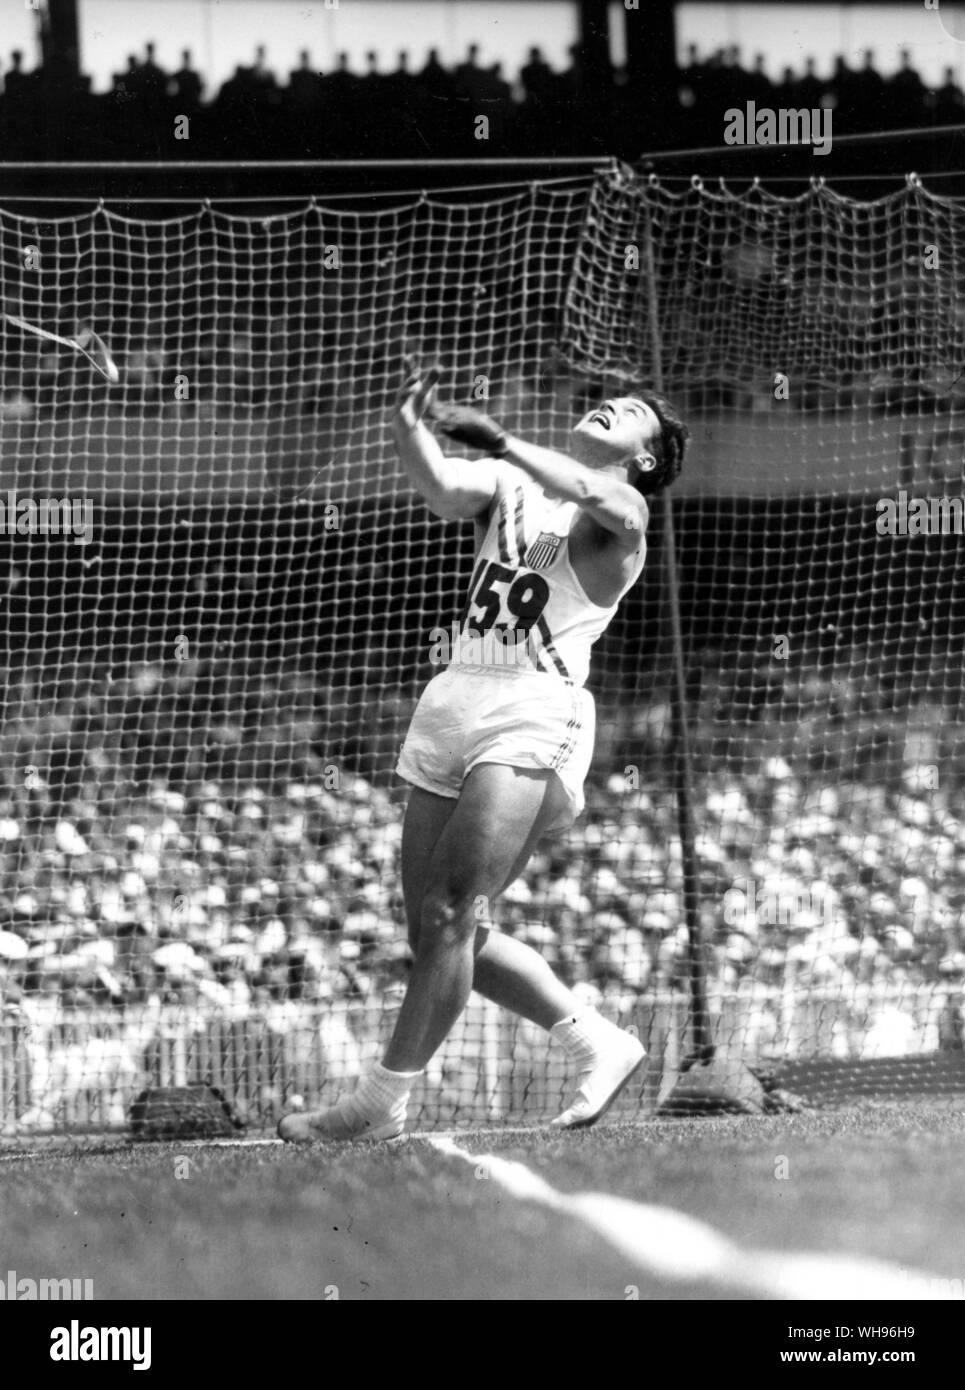 Aus., Melbourne, Olympics, 1956: Harold Connolly, 25 years old of USA, during the final of the hammer-throwing event, which he won. Stock Photo